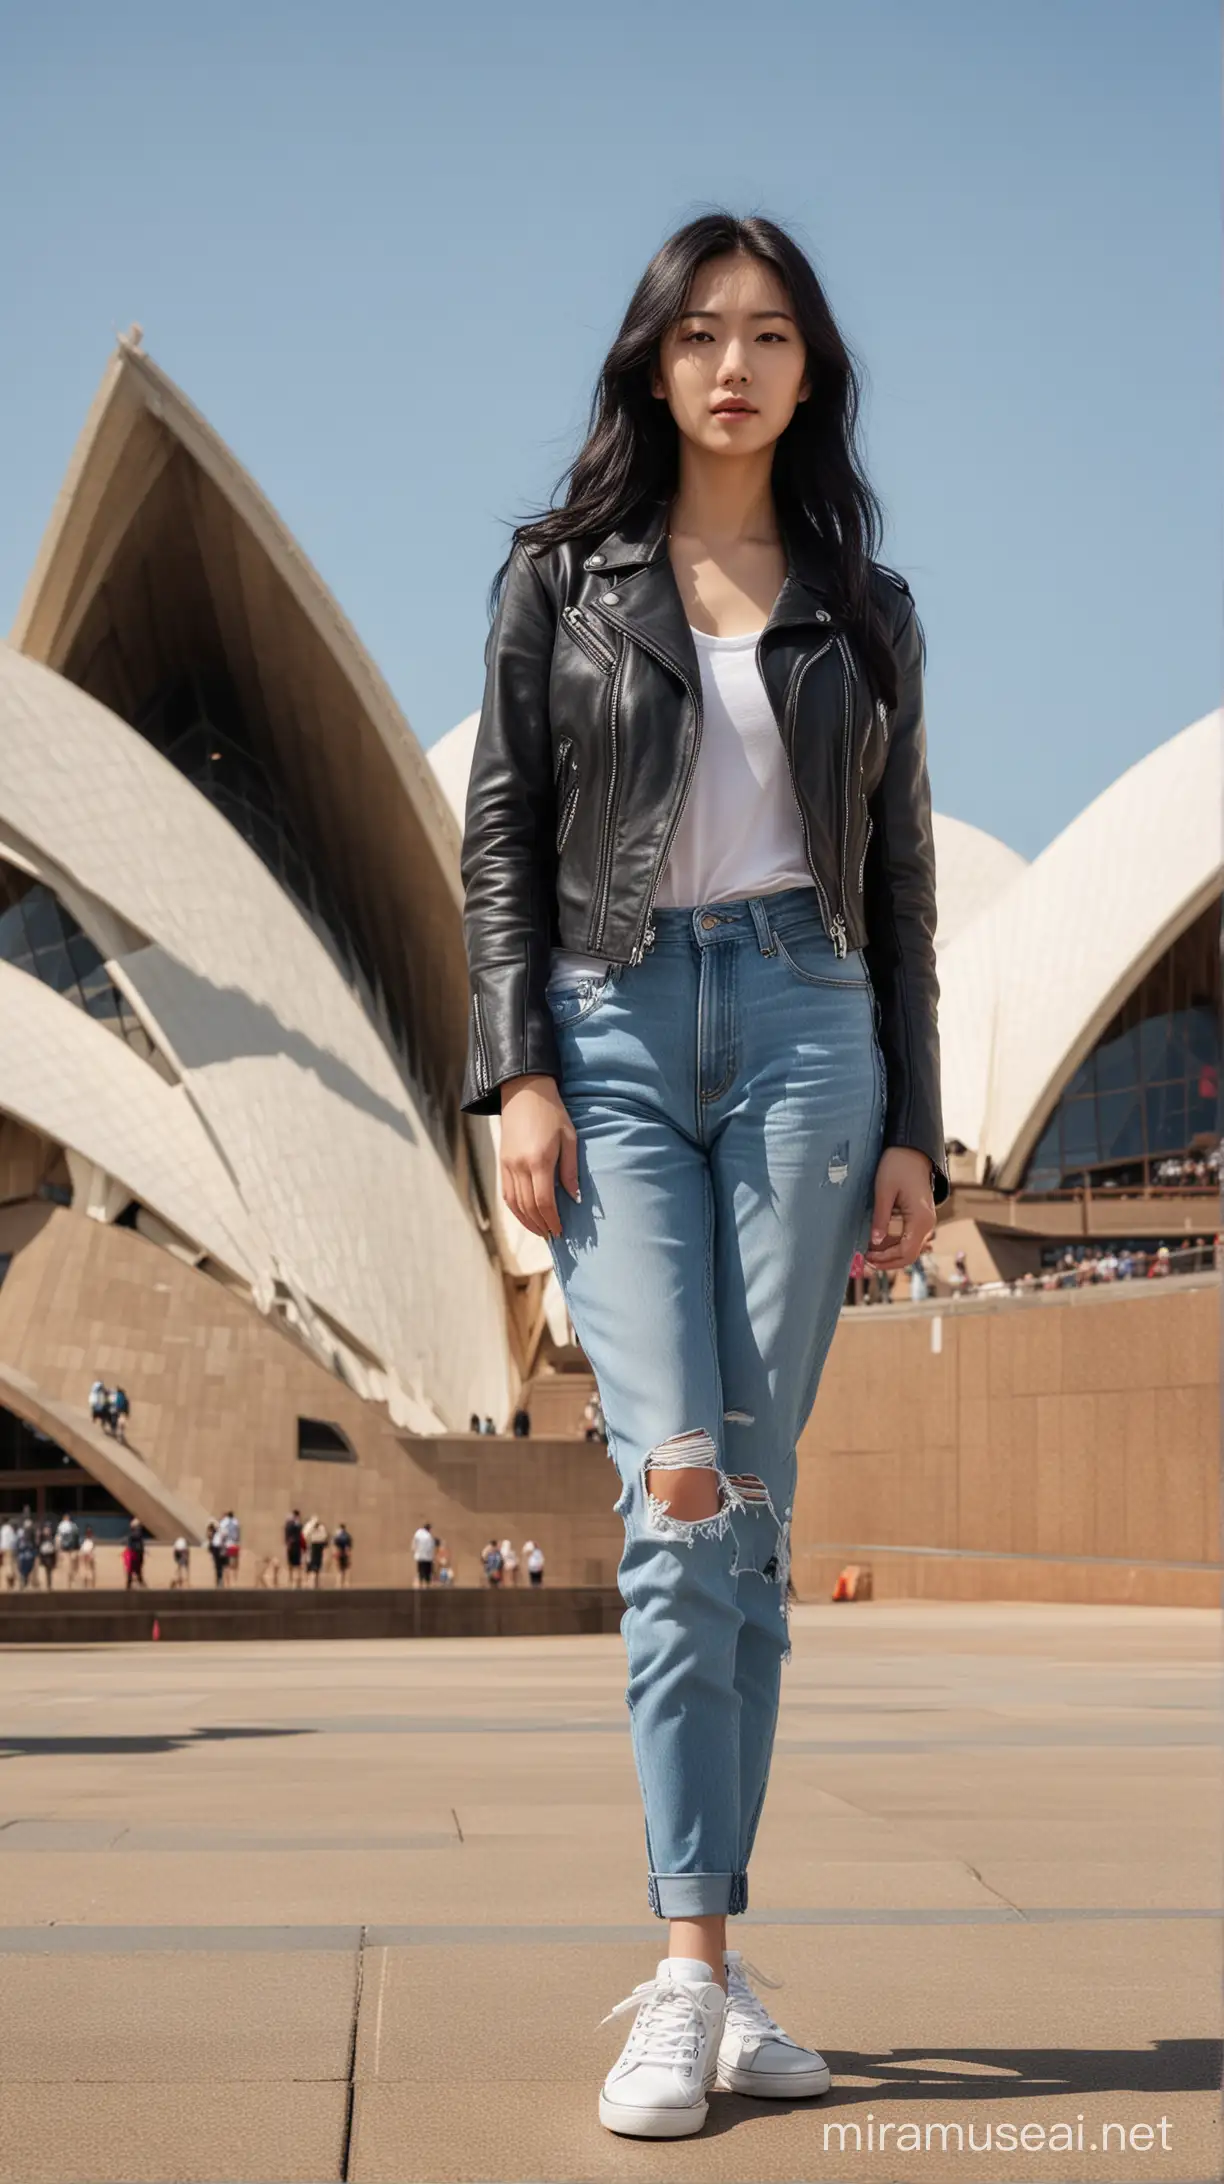 Stylish Korean Woman Poses at Sydney Opera House in Romantic HDR Image